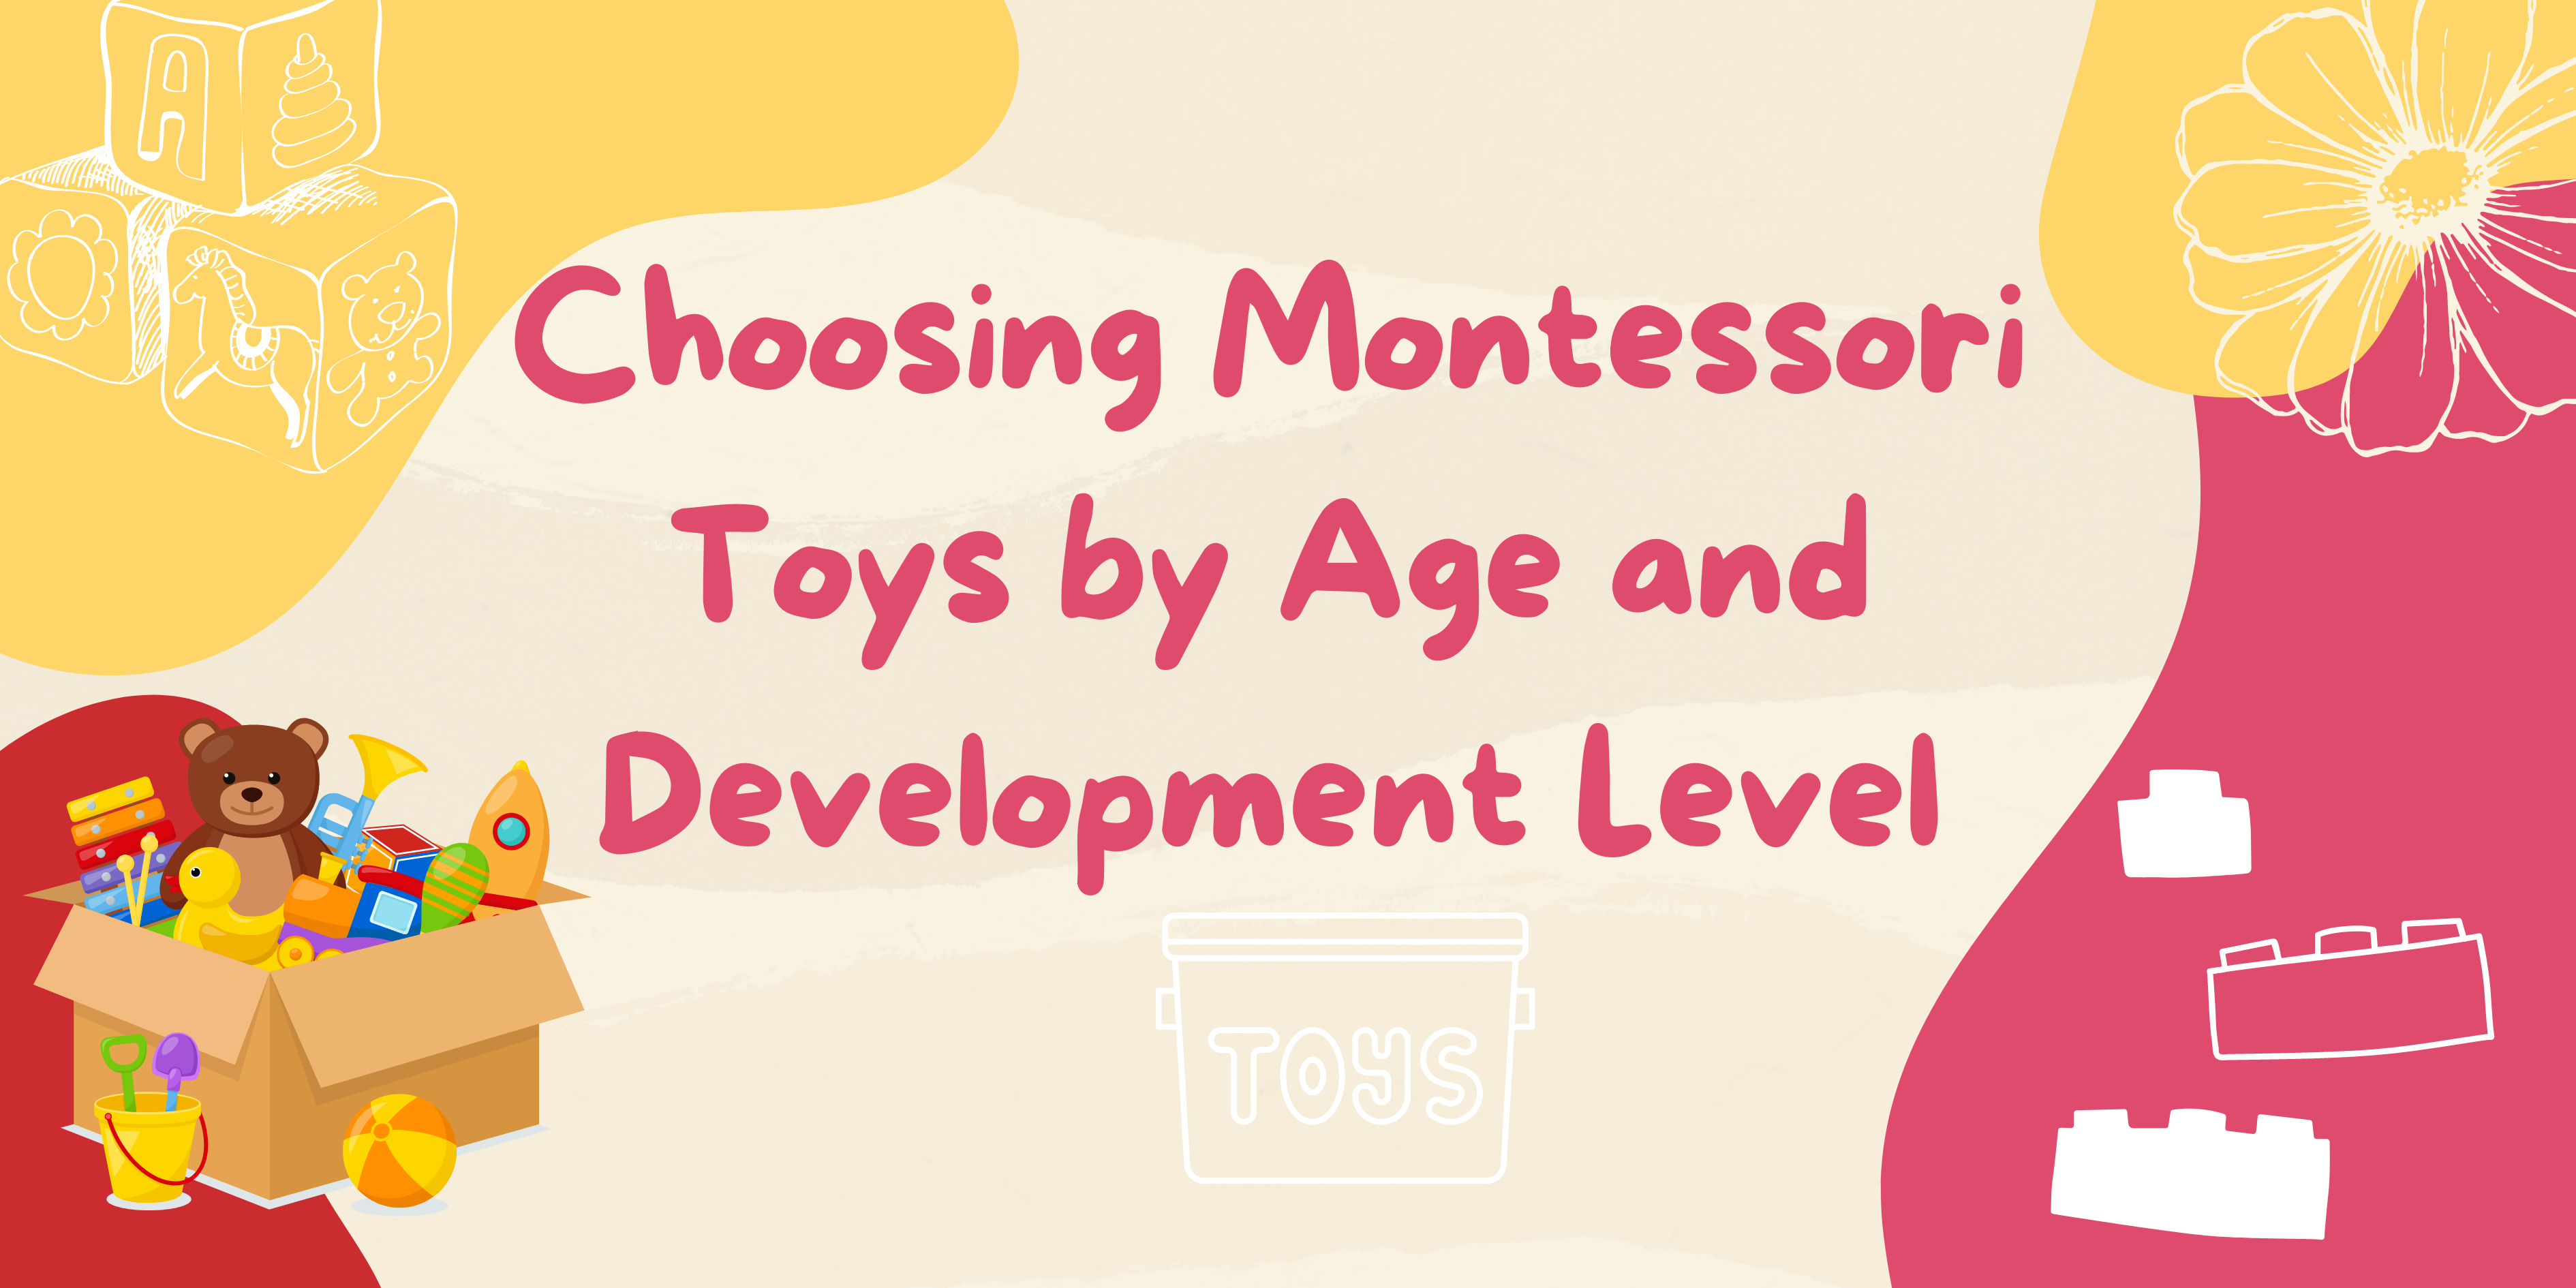 Choosing Montessori Toys by Age and Development Level